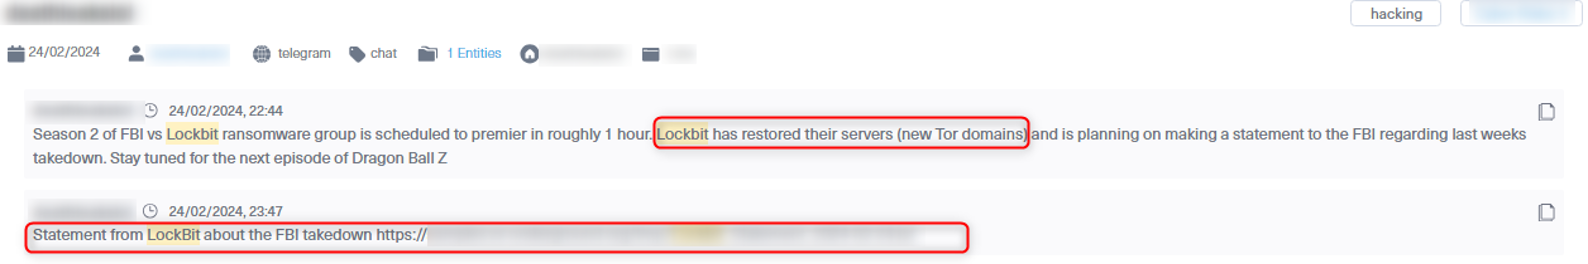 The post Lunar's alert showed indicating that LockBit has new Tor domains